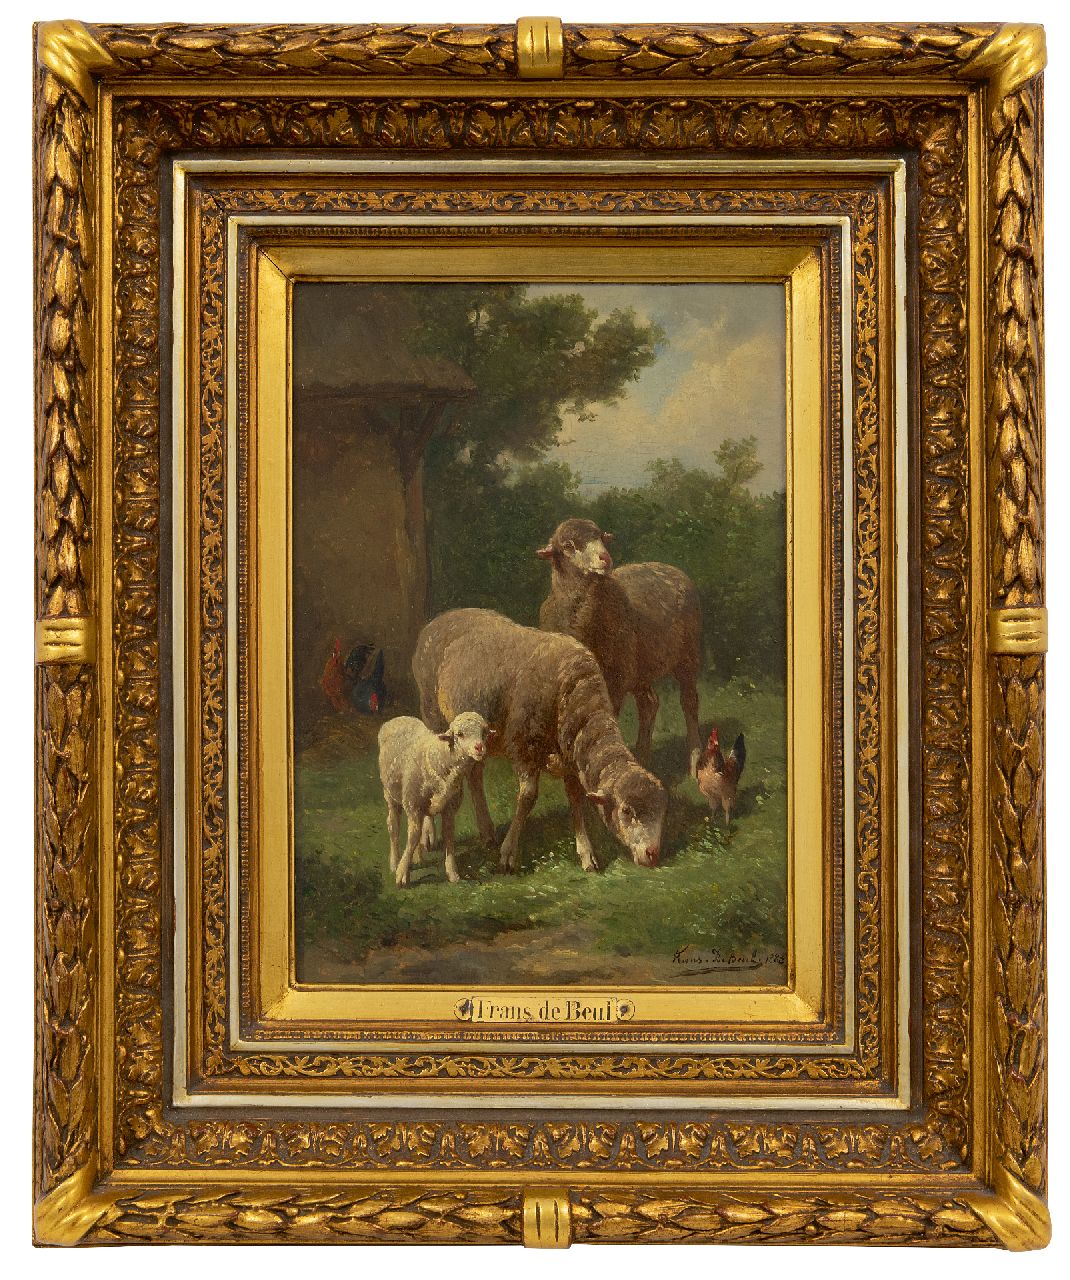 Beul F. de | Frans de Beul | Paintings offered for sale | Sheep and a lamb in the meadow, oil on panel 34.1 x 23.8 cm, signed l.r. and dated 1883